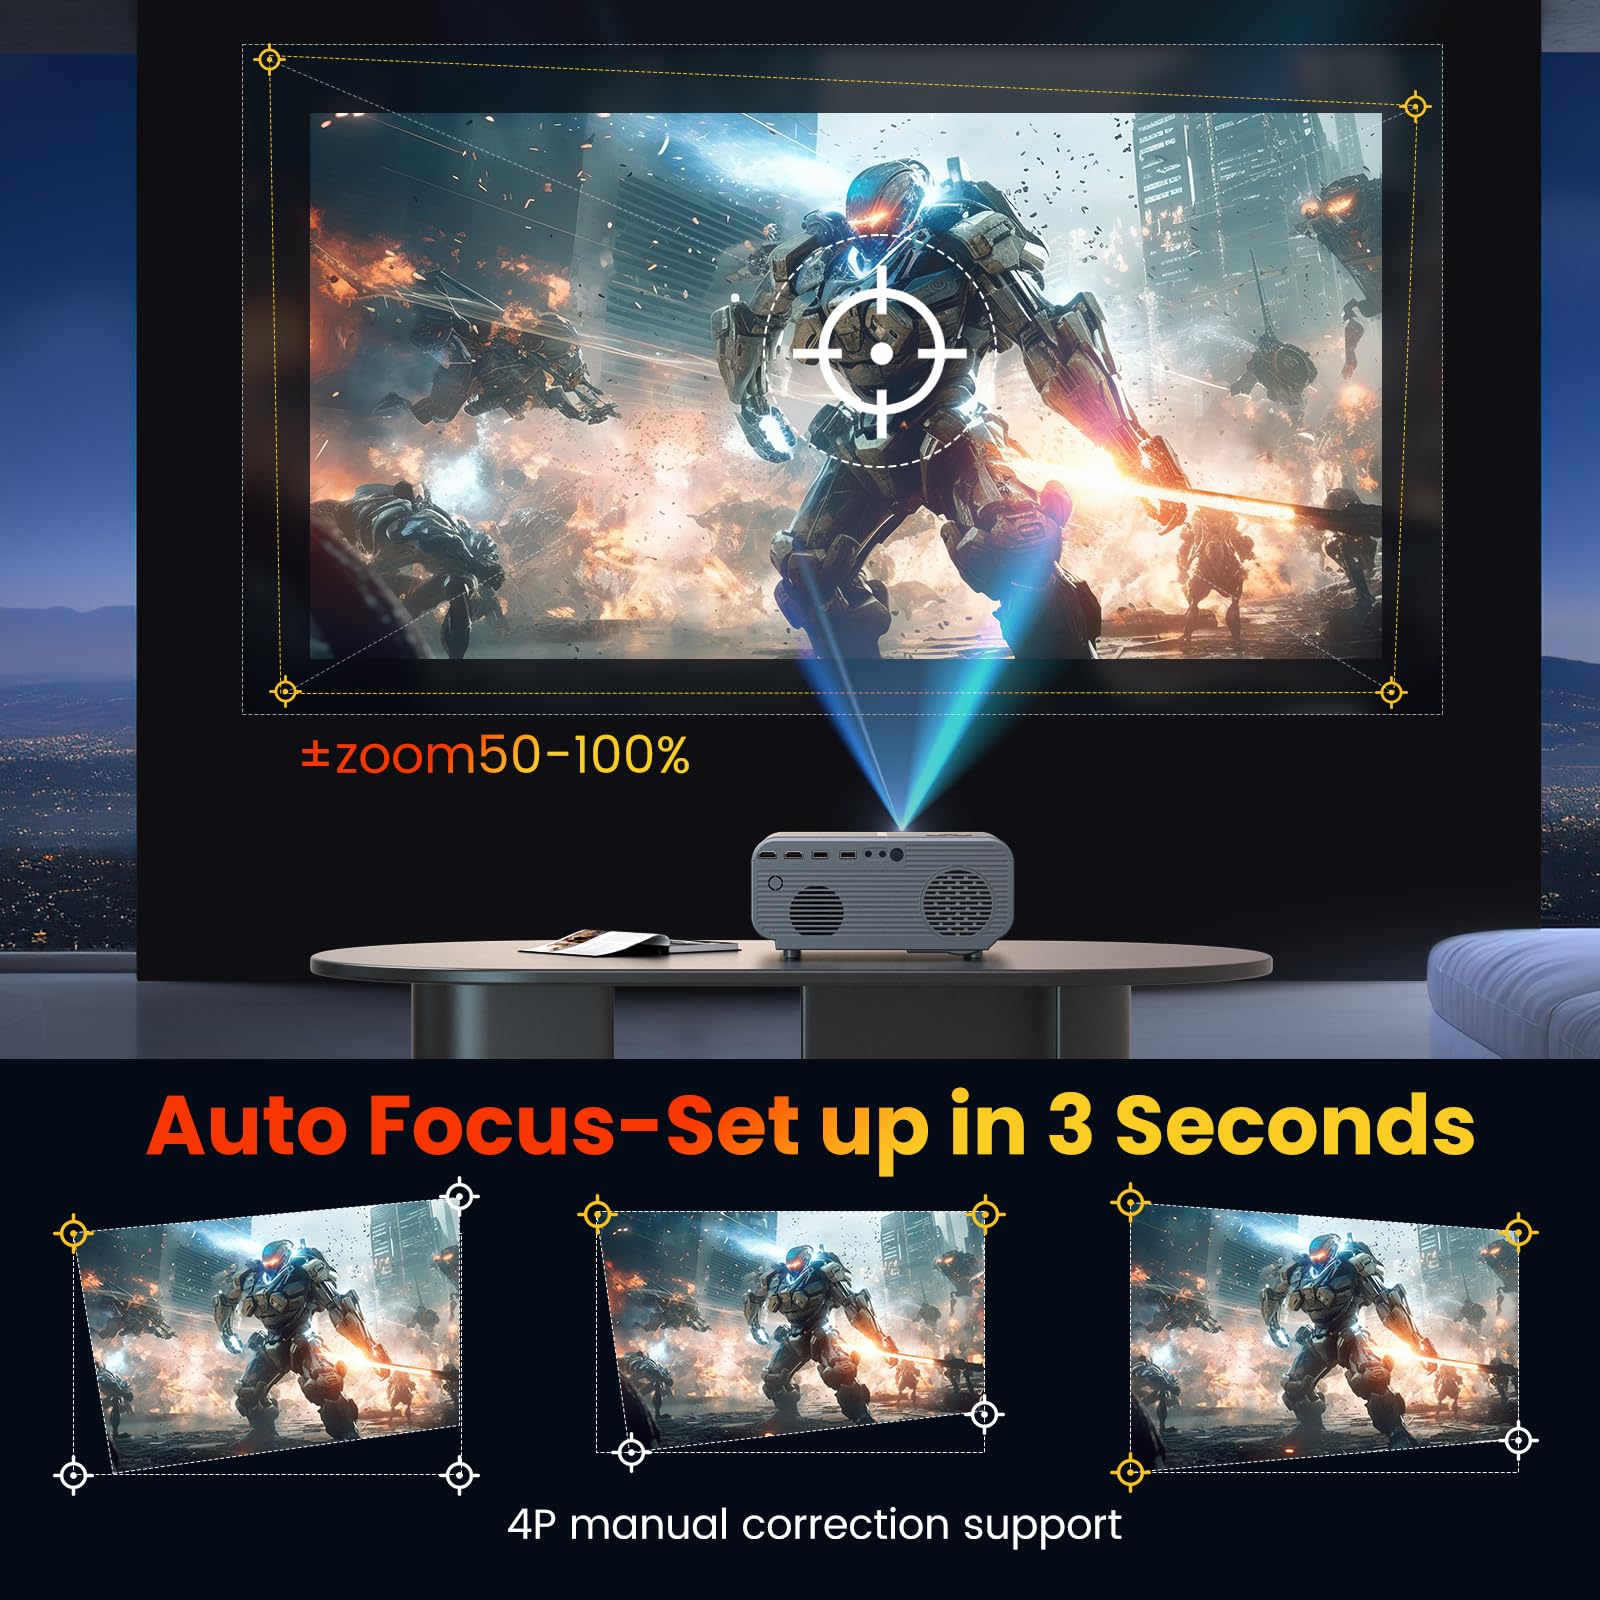 [Auto Focus] HAPPRUN Projector, Projector with WiFi and Bluetooth, 15000lux 500ANSI Outdoor Projector 4K, 6D Keystone & 50% Zoom, Native 1080P Projector Compatible with HDMI/USB/AV/Phone/TV Stick/PS5